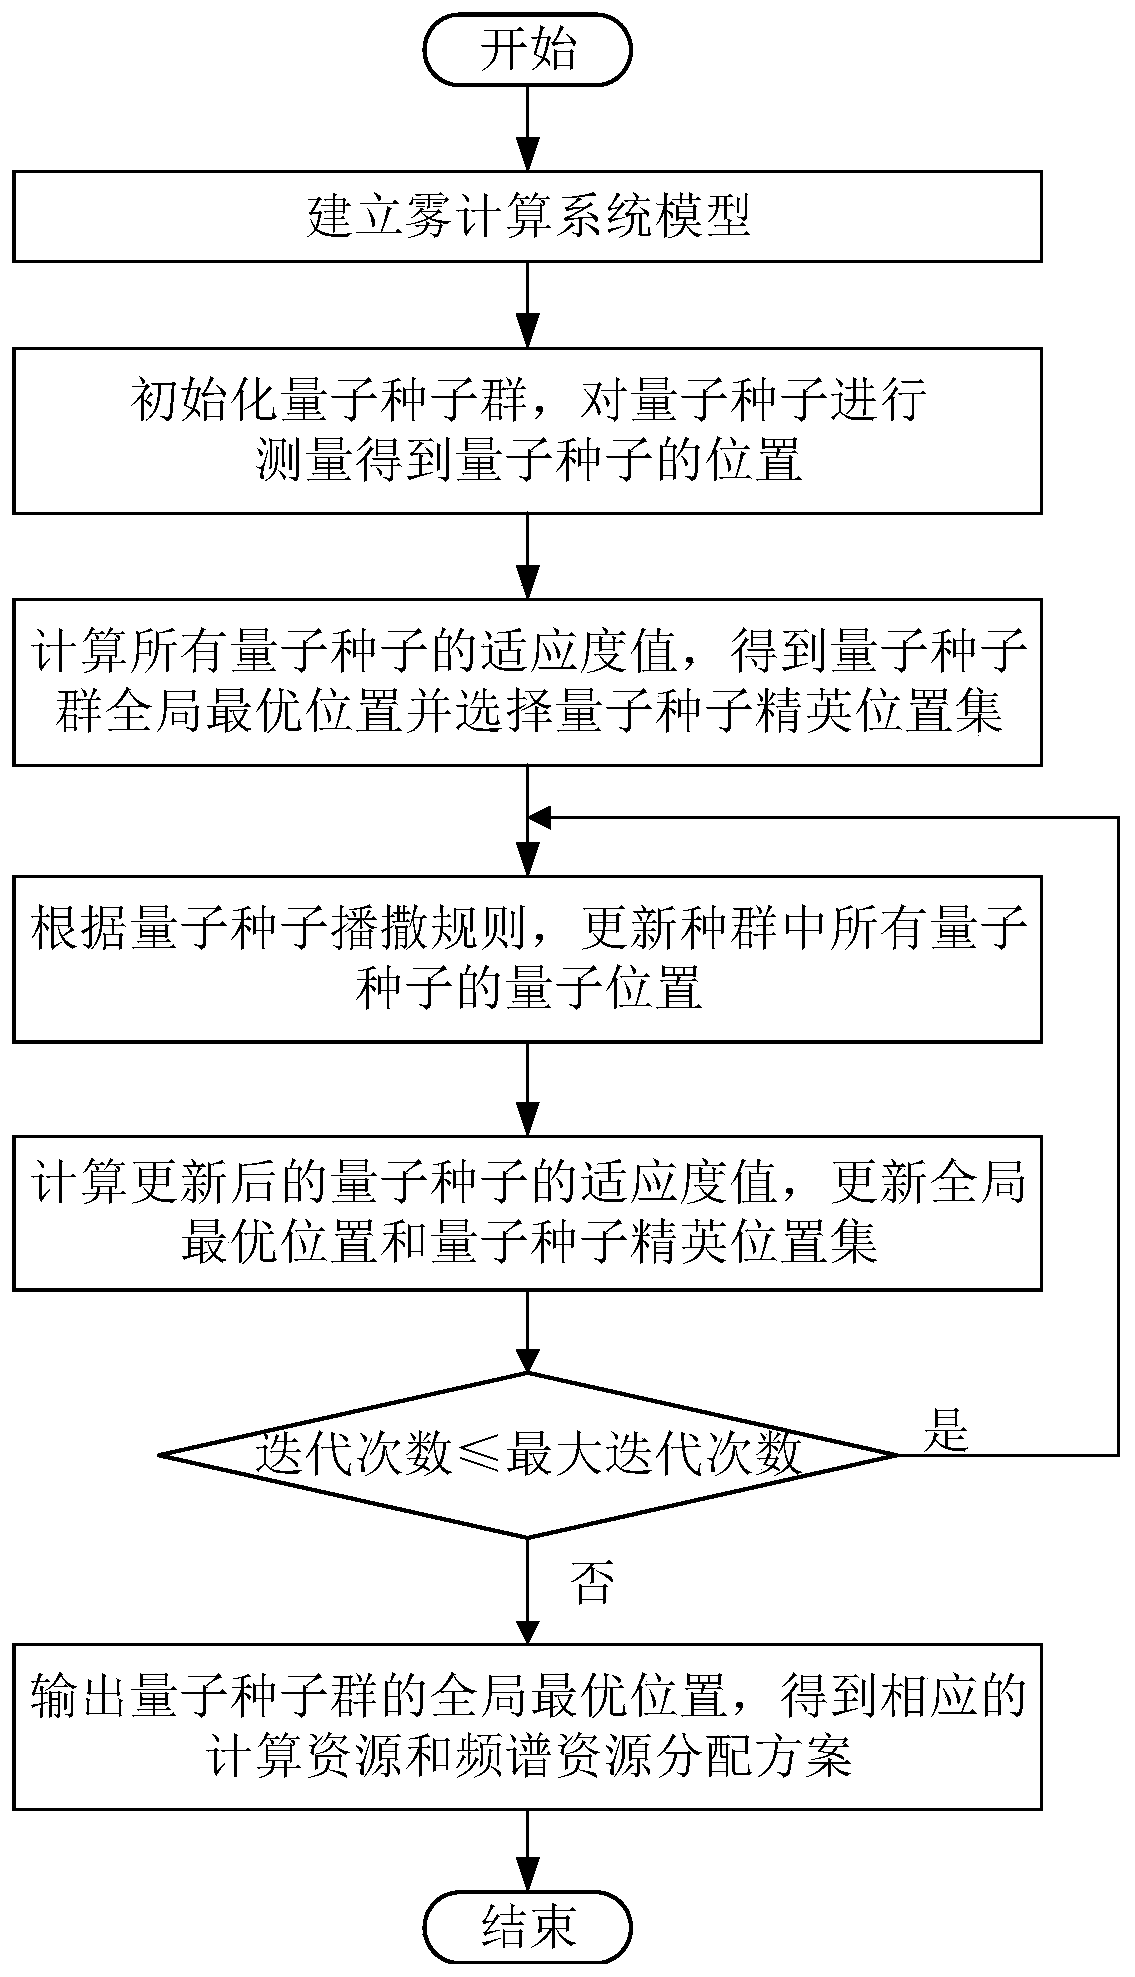 Computing resource and spectrum resource distribution method for fog computing in Internet of Things